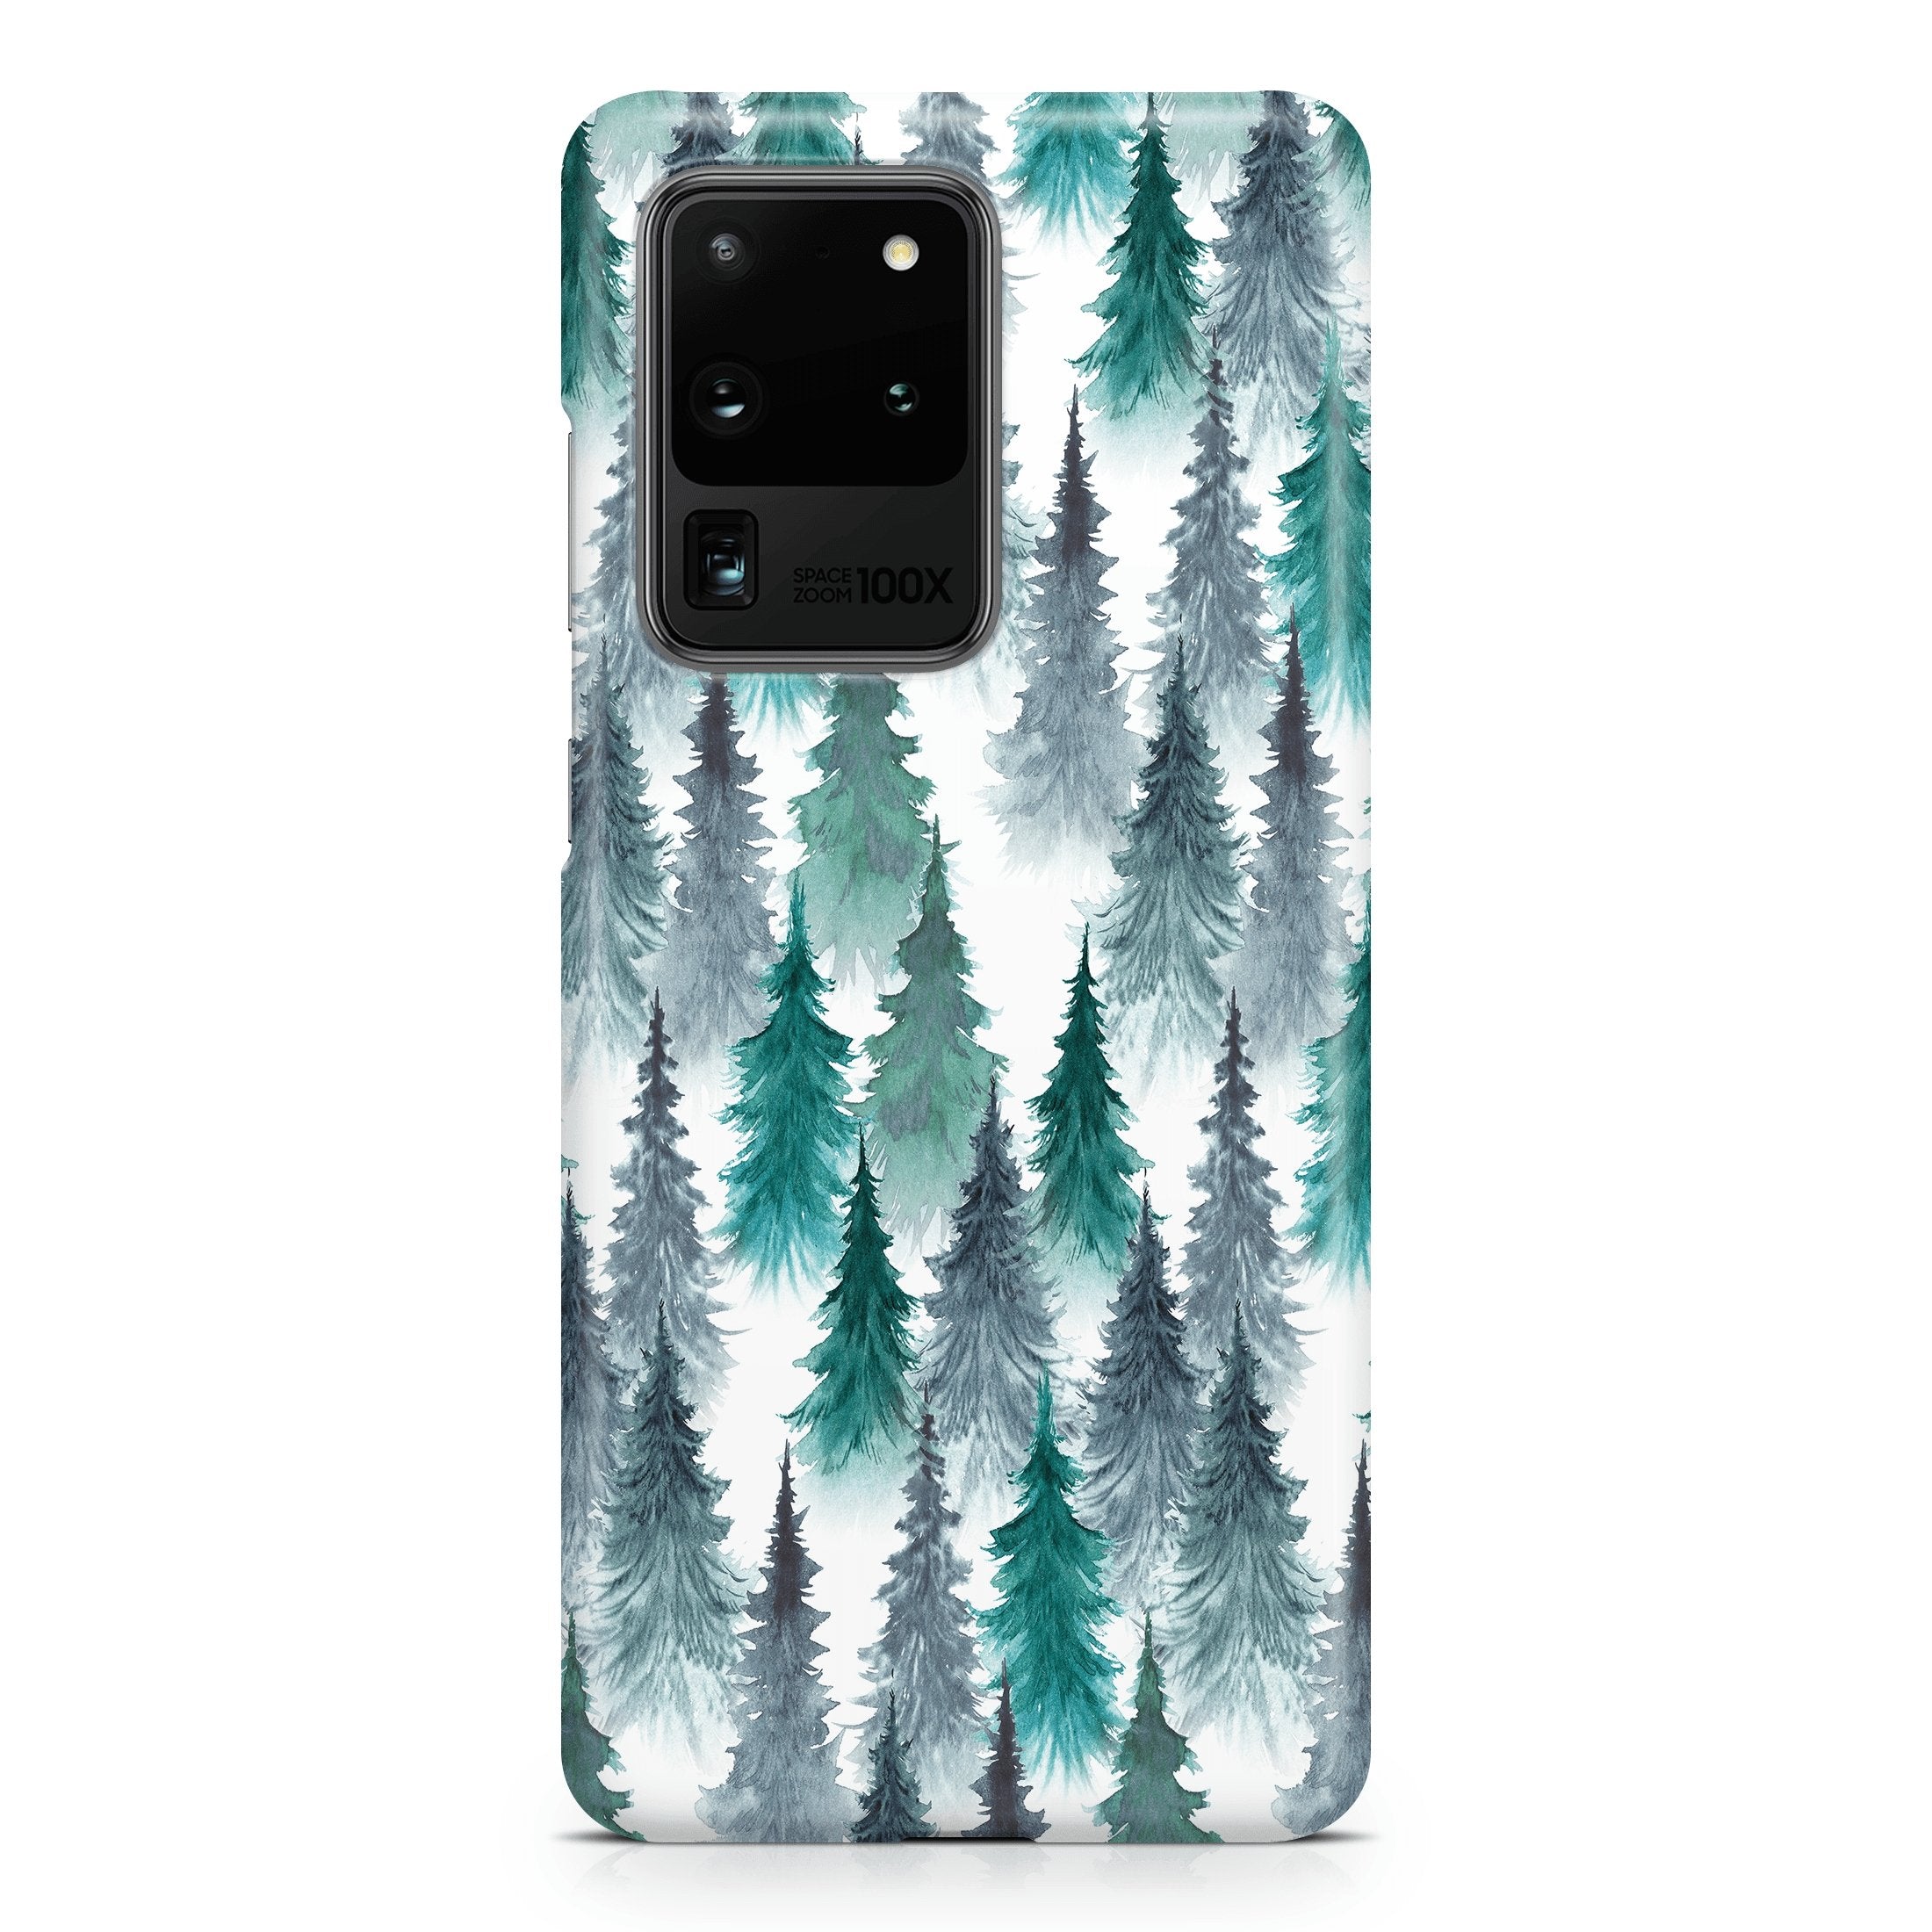 Winter Forest III - Samsung phone case designs by CaseSwagger